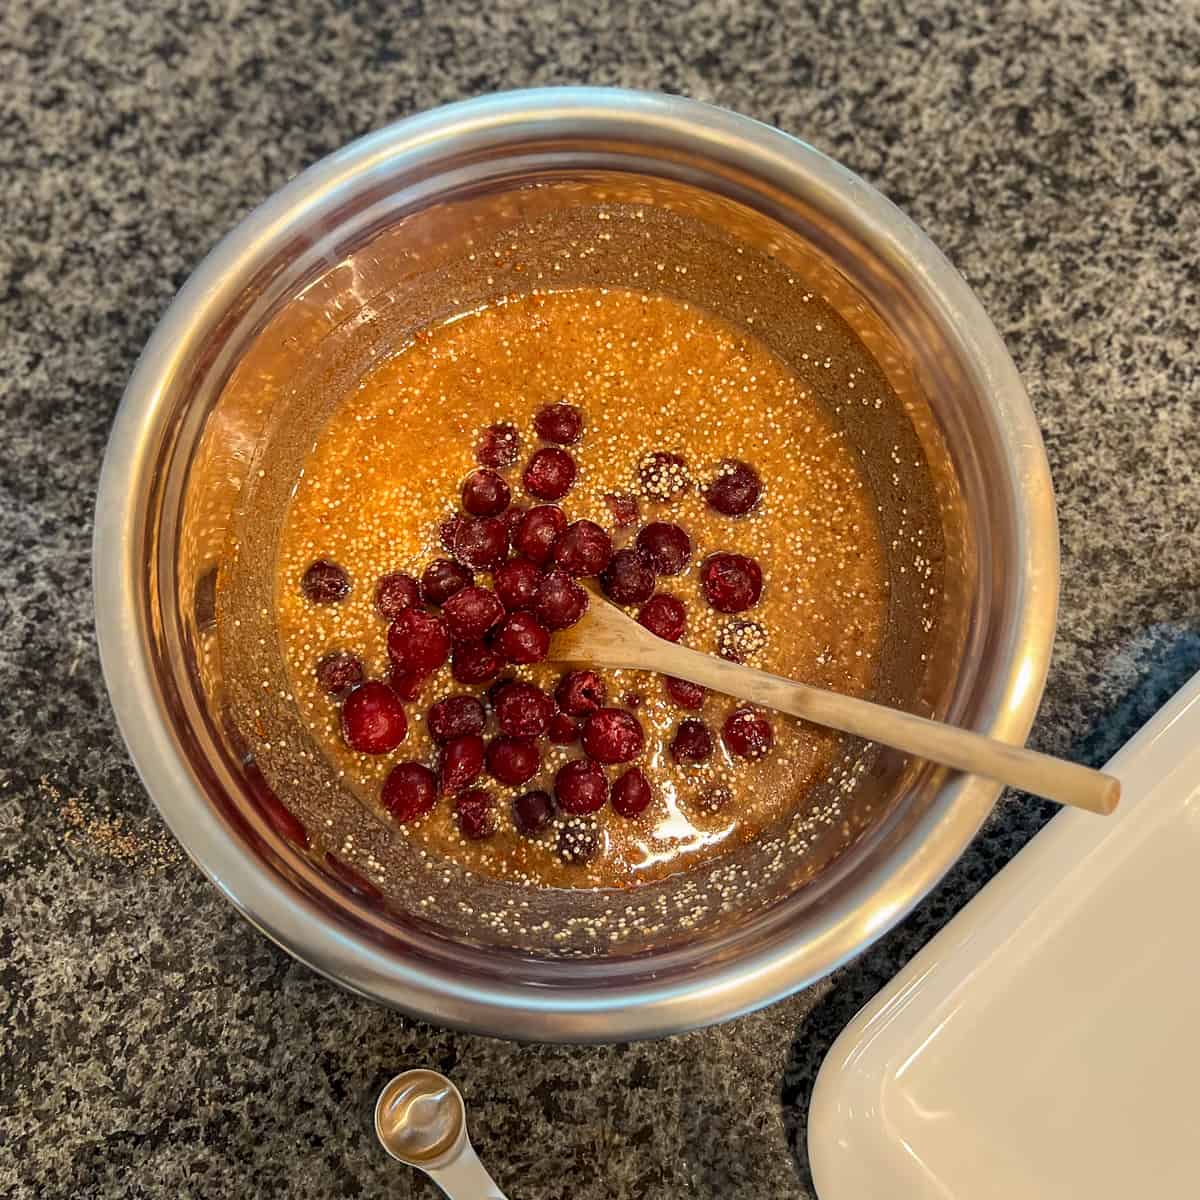 A large stainless steel mixing bowl with cherries, water, quinoa and other ingredients.